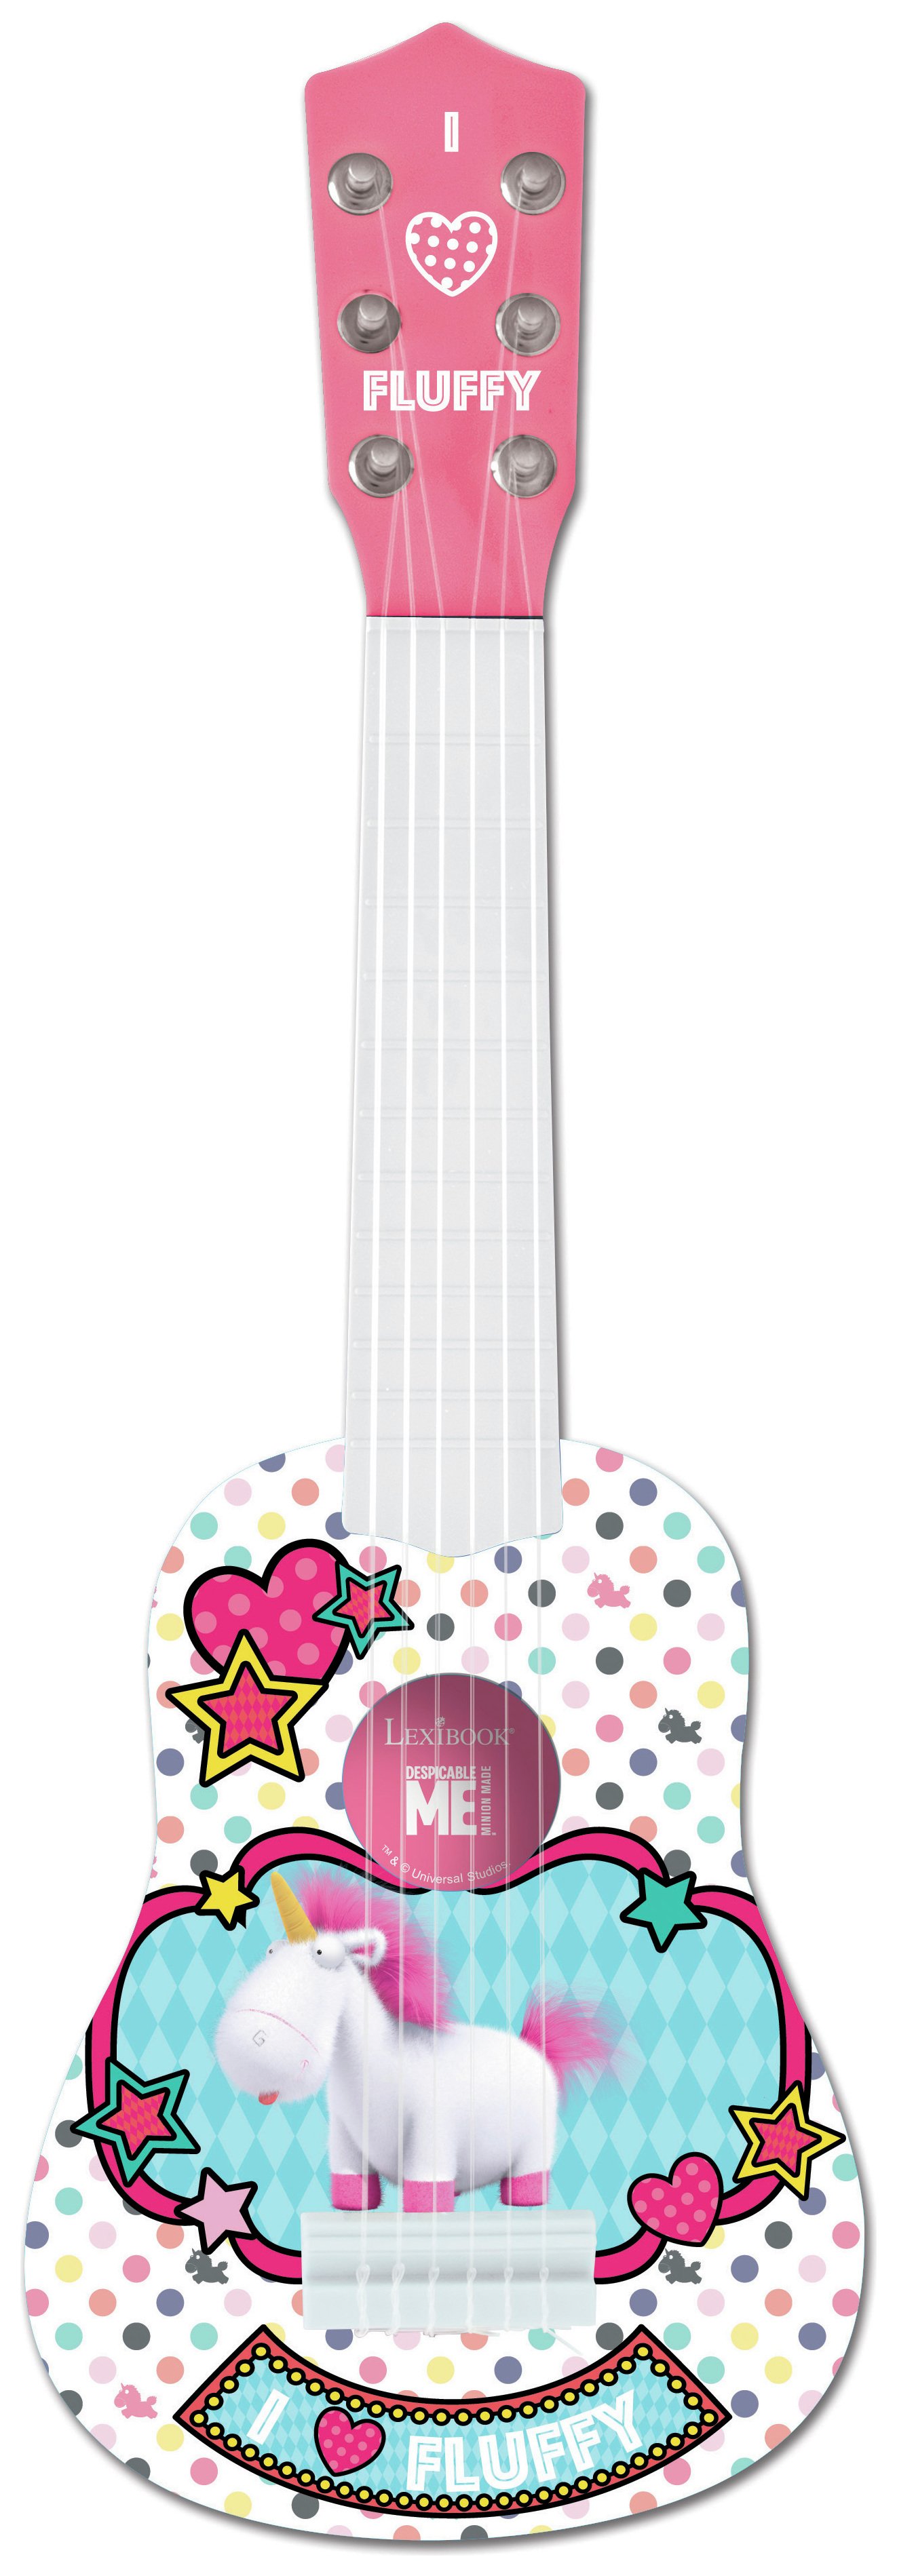 Lexibook Despicable Me Fluffy My First Guitar